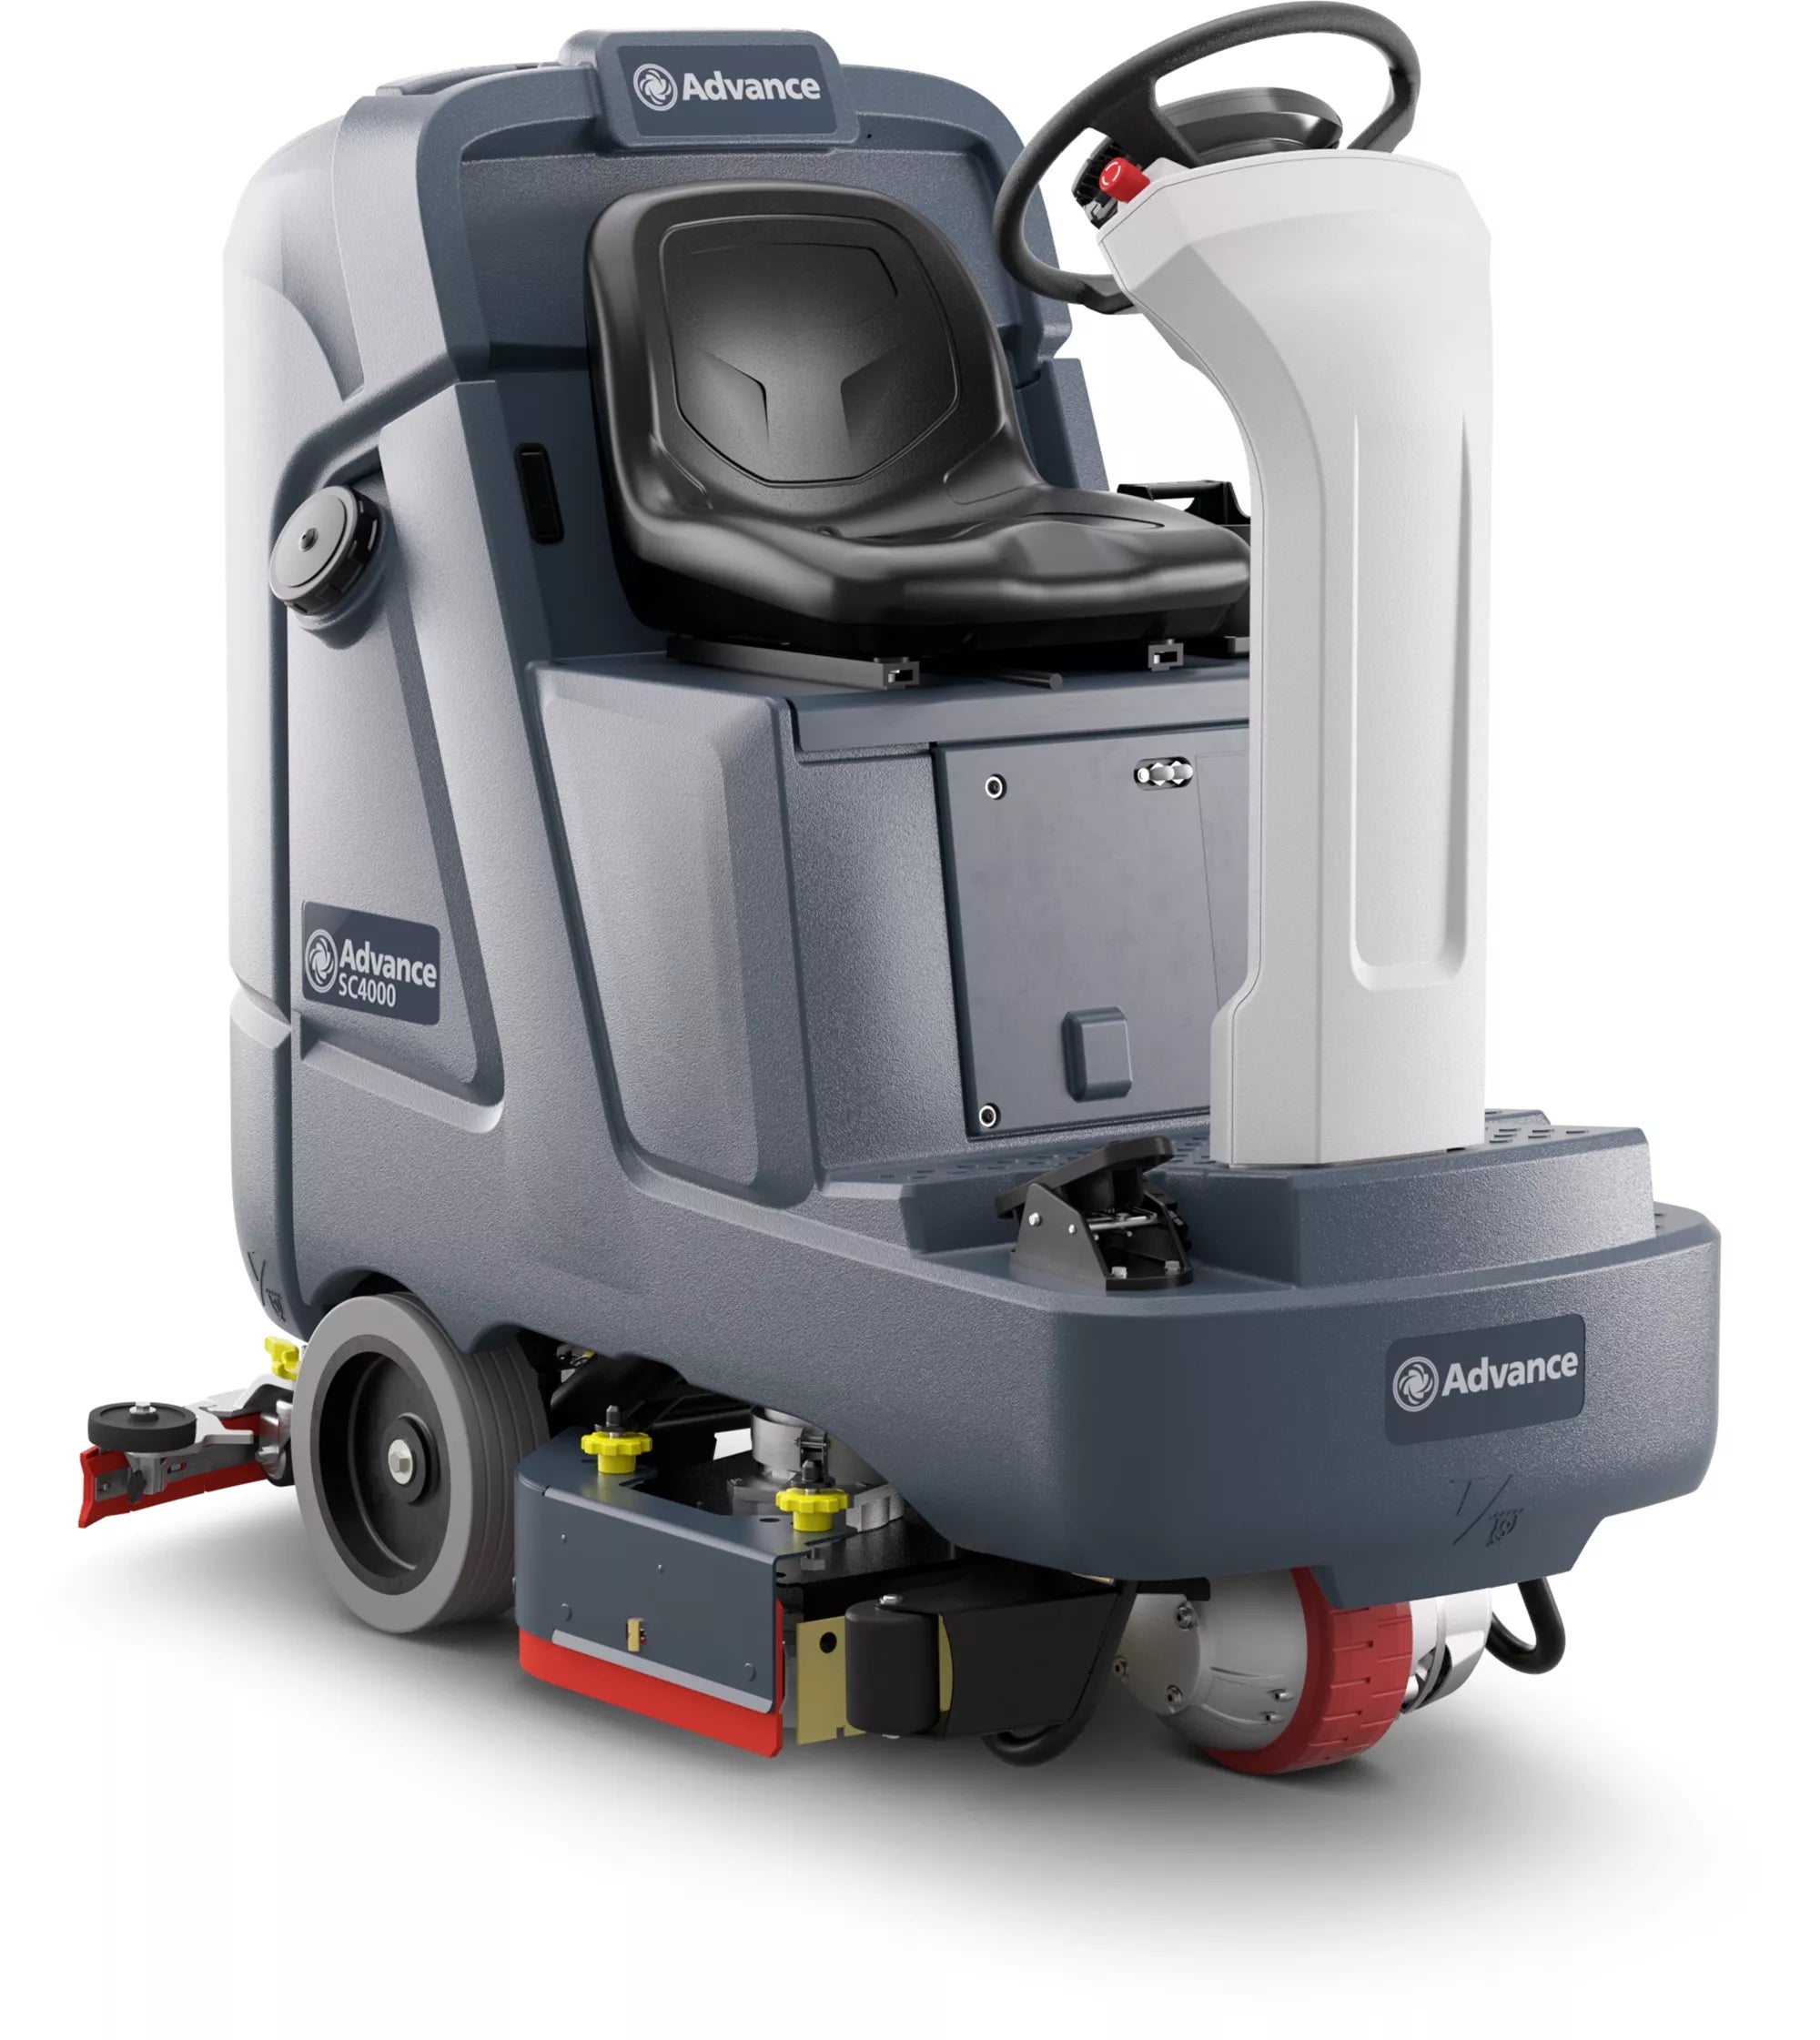 Advance SC250 Compact Battery Powered Floor Scrubber- New